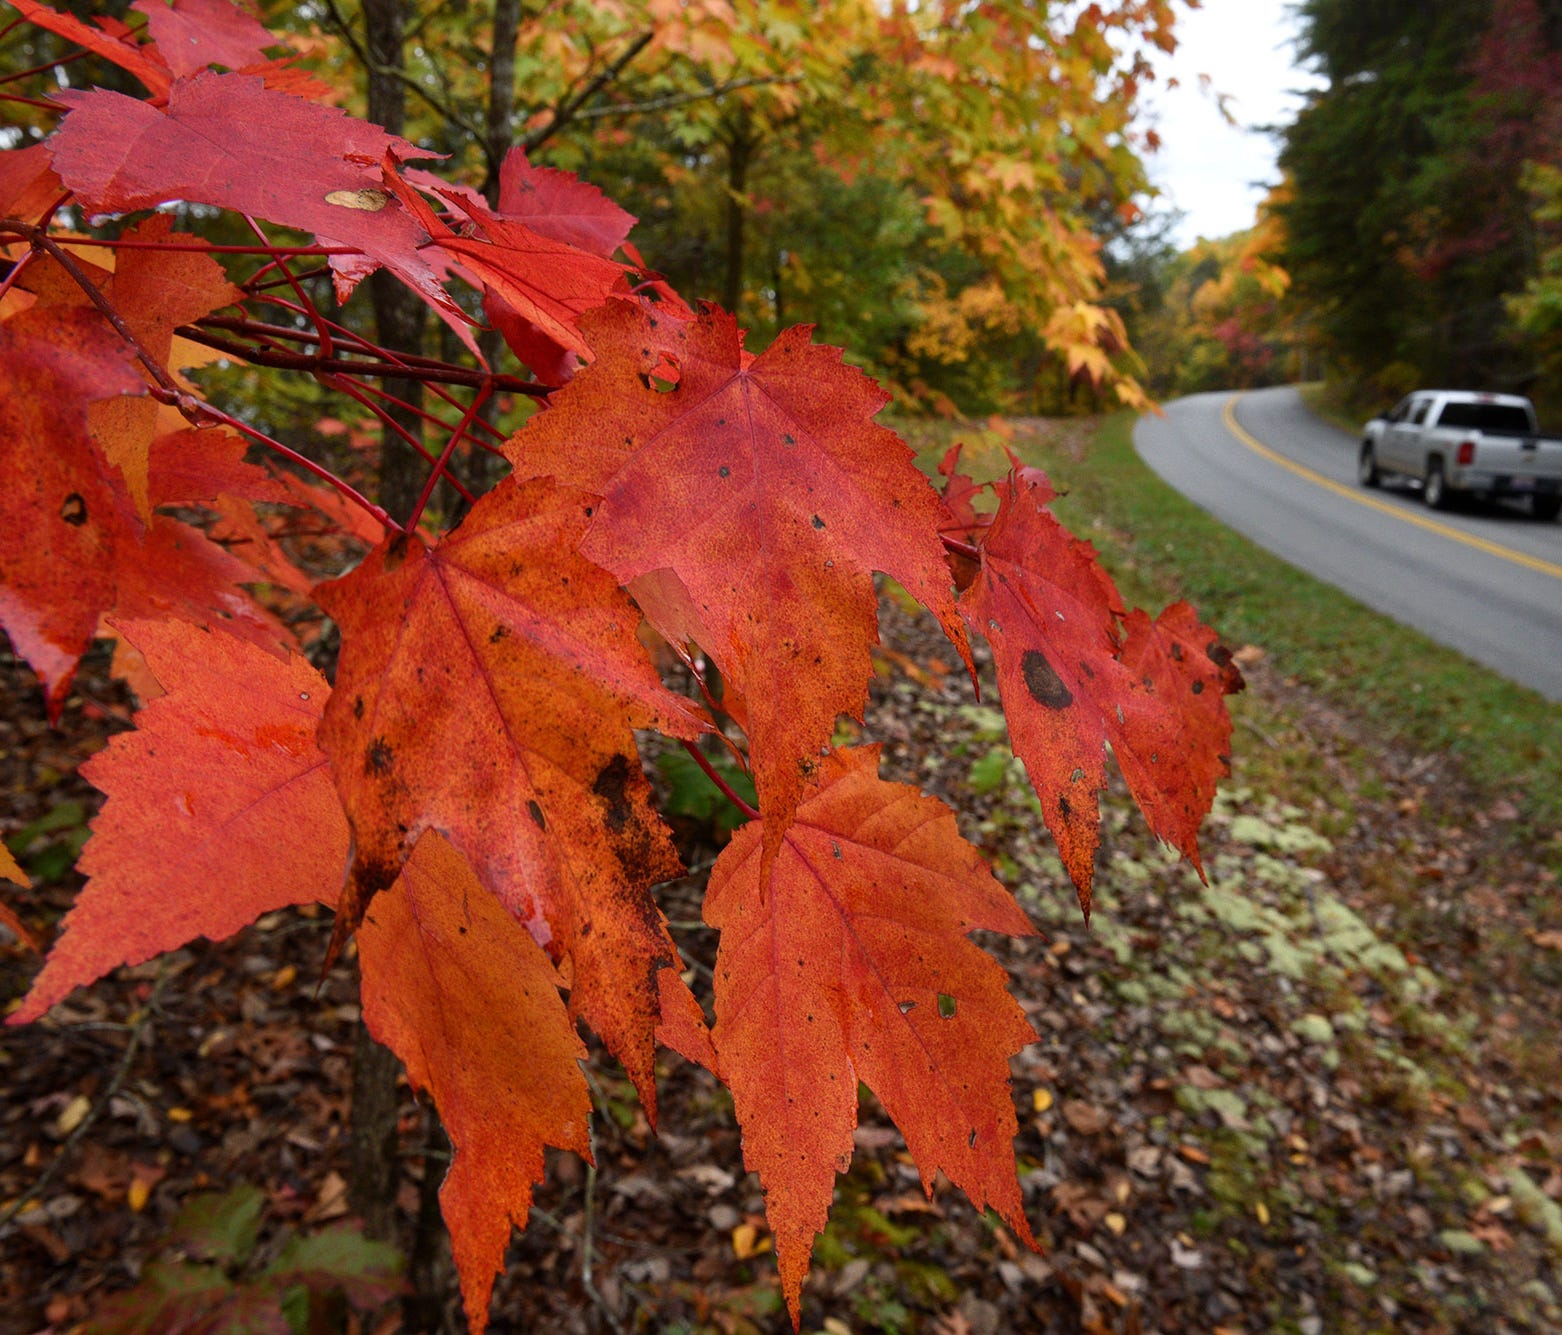 Fall colors can be seen in the Foothills Parkway area of Blount County, Tenn., on Oct. 26, 2015.